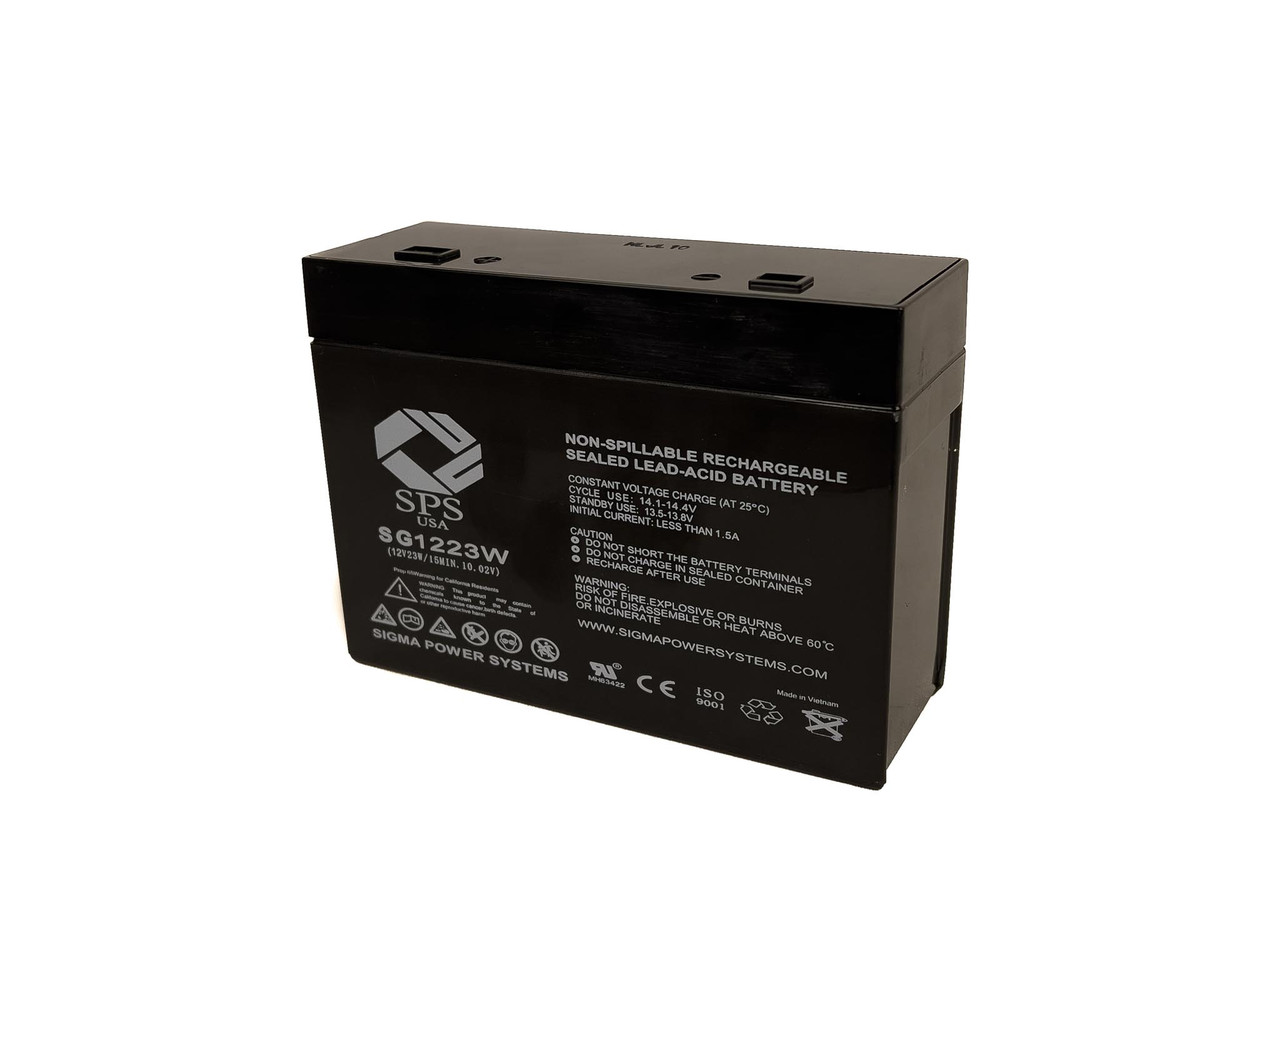 Raion Power 12V 5.2Ah 23W Non-Spillable Replacement Battery for Telong TL1245C